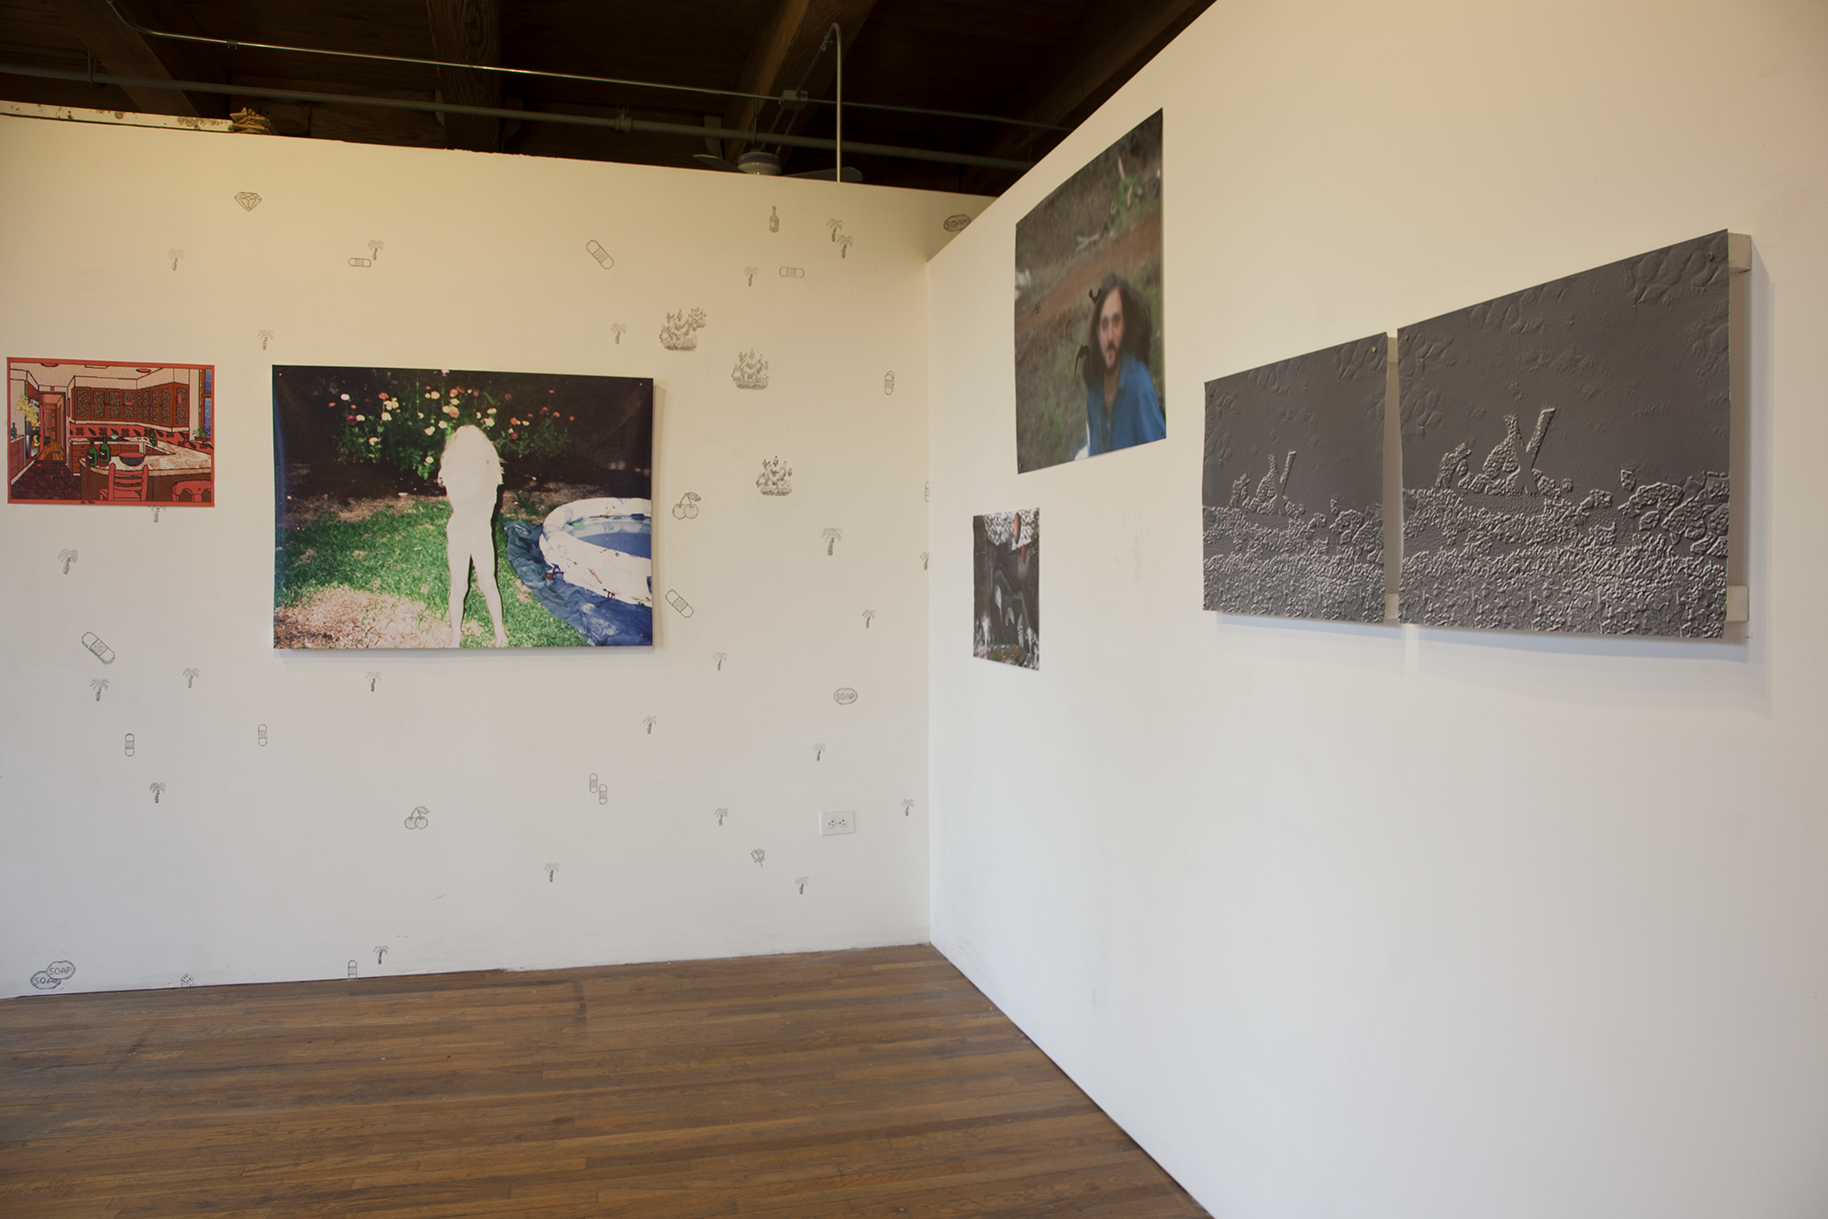 Installation view of six large scale prints hung on white walls with Kidpix graphics drawn in pencil on them